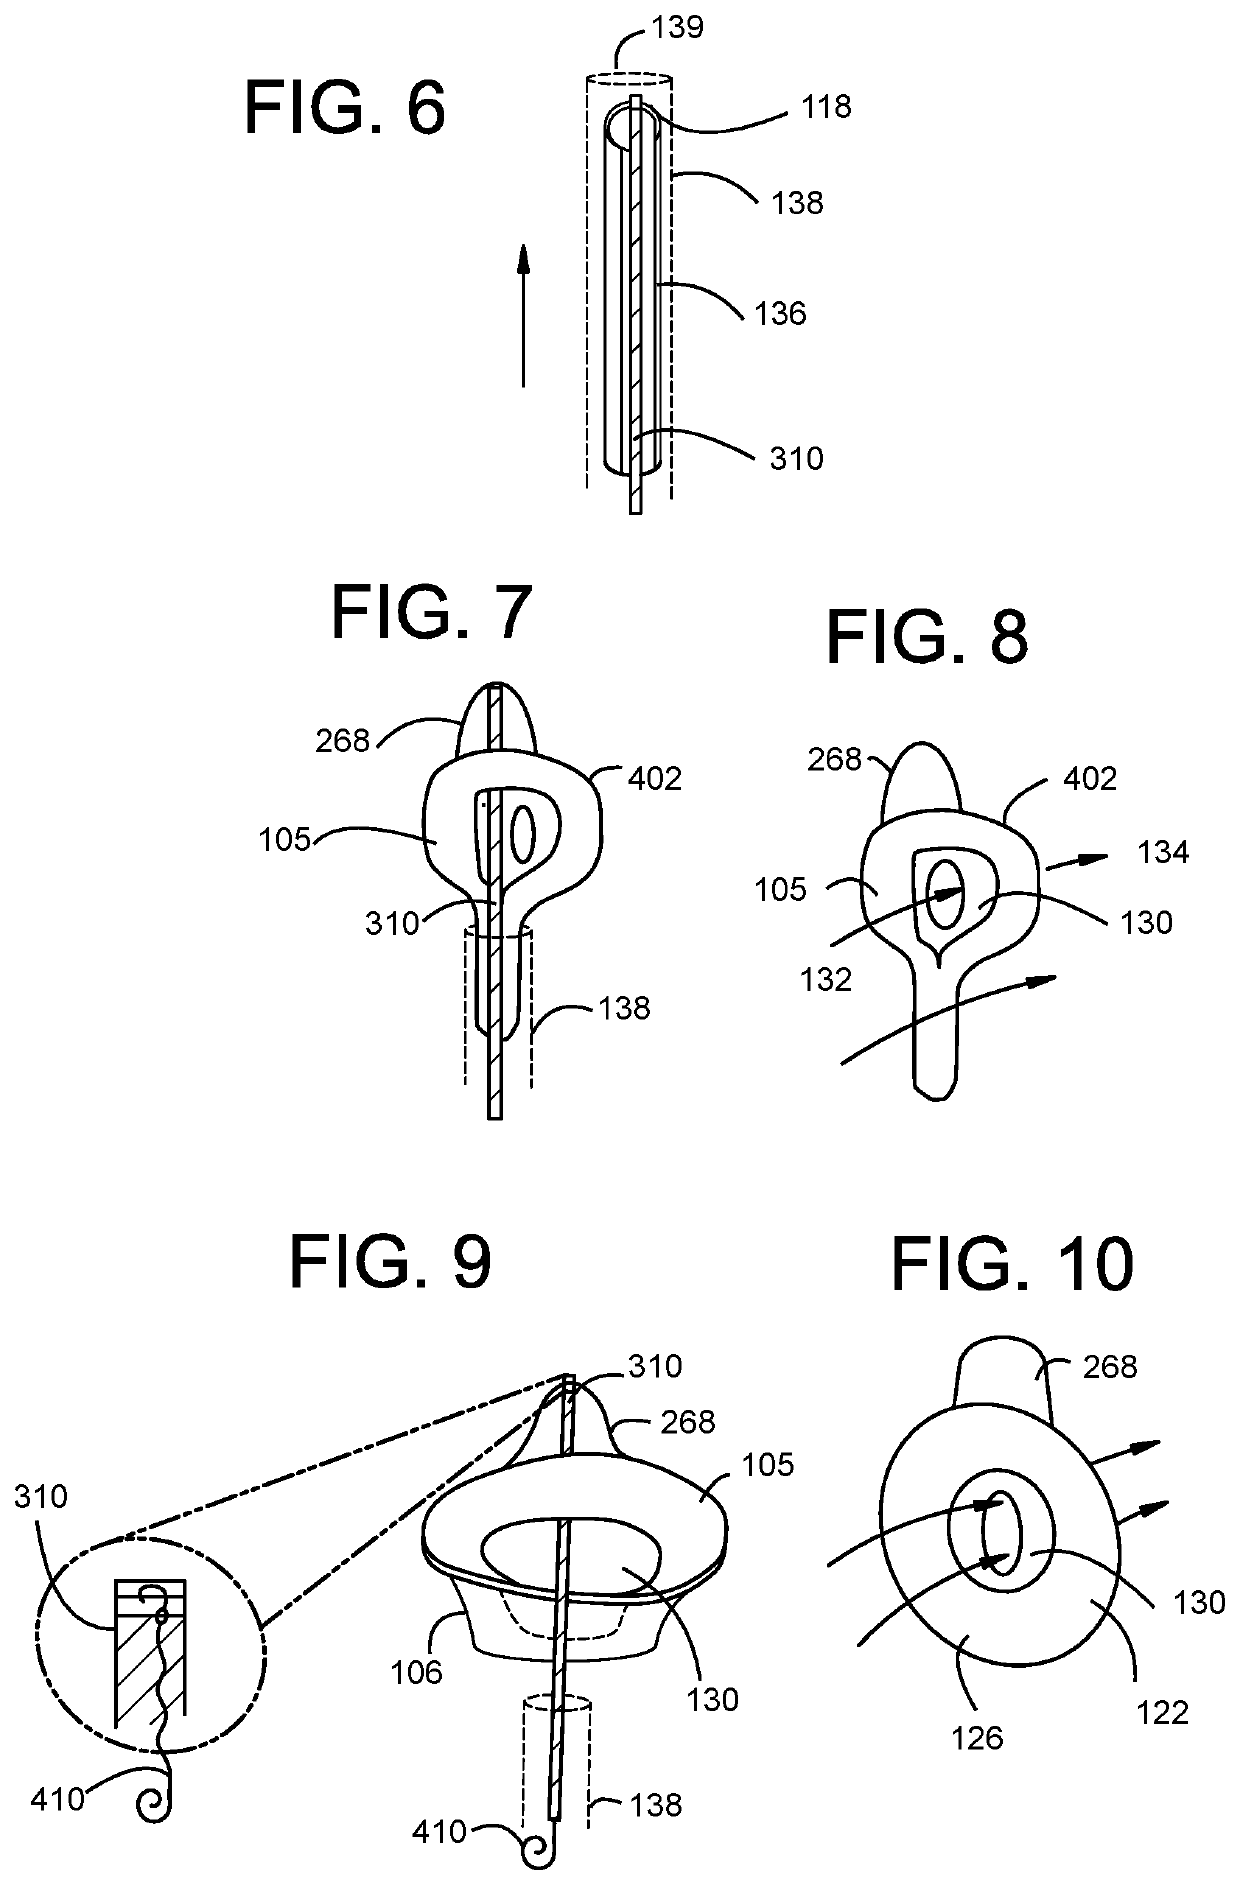 Compression capable annular frames for side delivery of transcatheter heart valve replacement